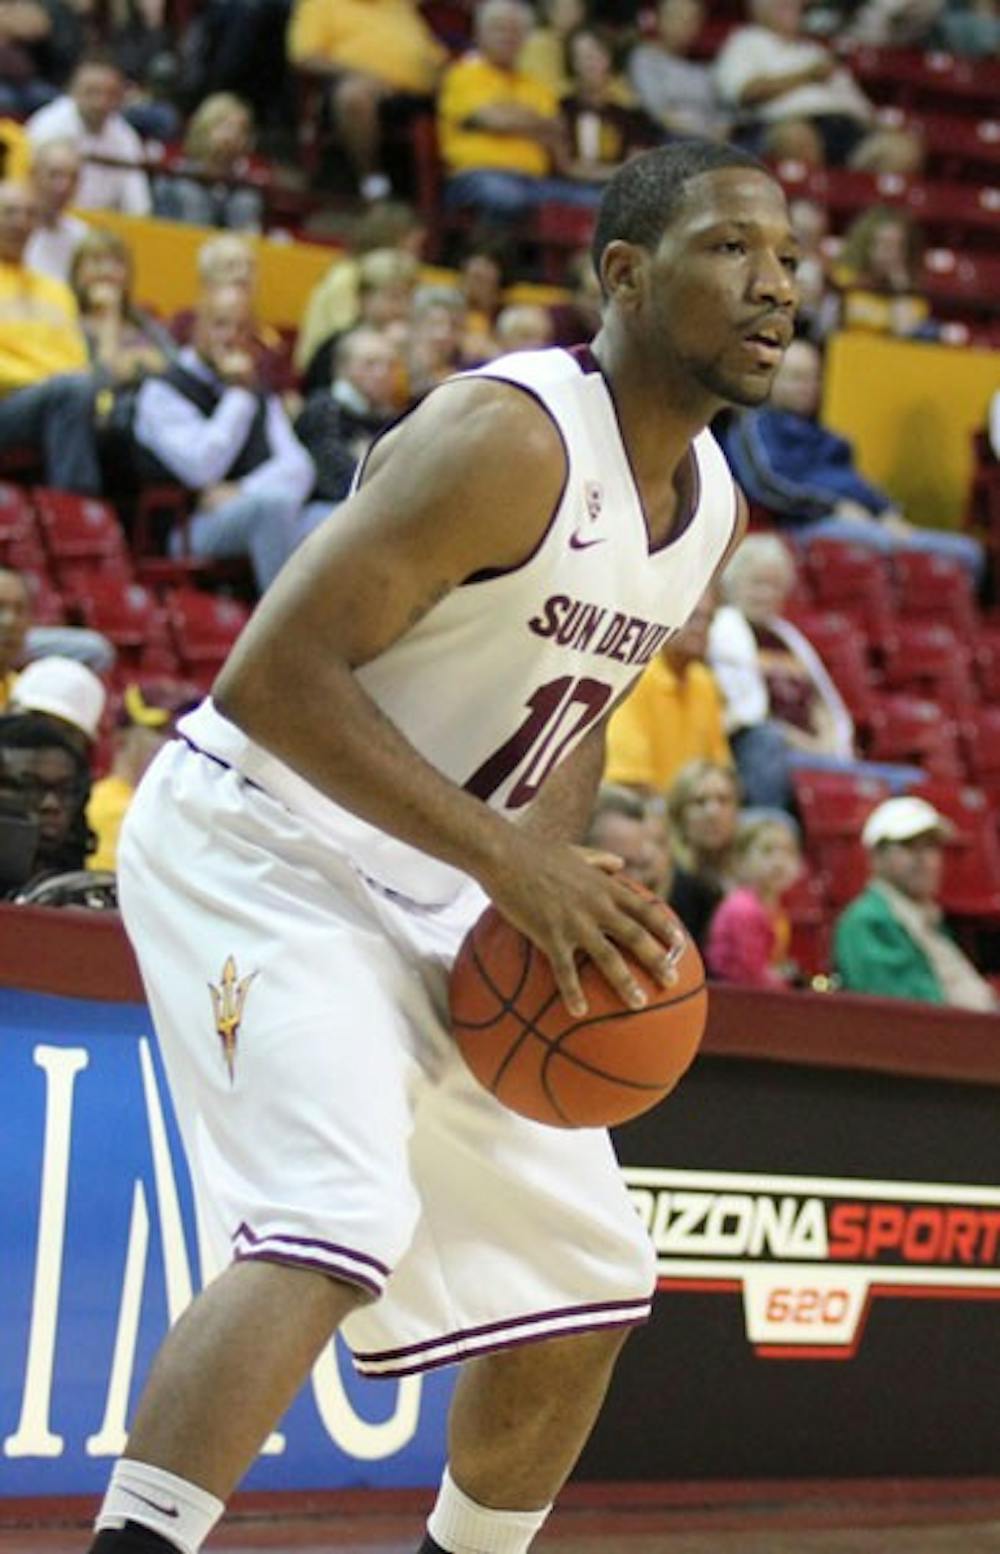 Junior guard Evan Gordon prepares to take a shot from the corner in ASU’s 90-70 victory over Sacramento State on Saturday. (Photo by Kyle Newman)